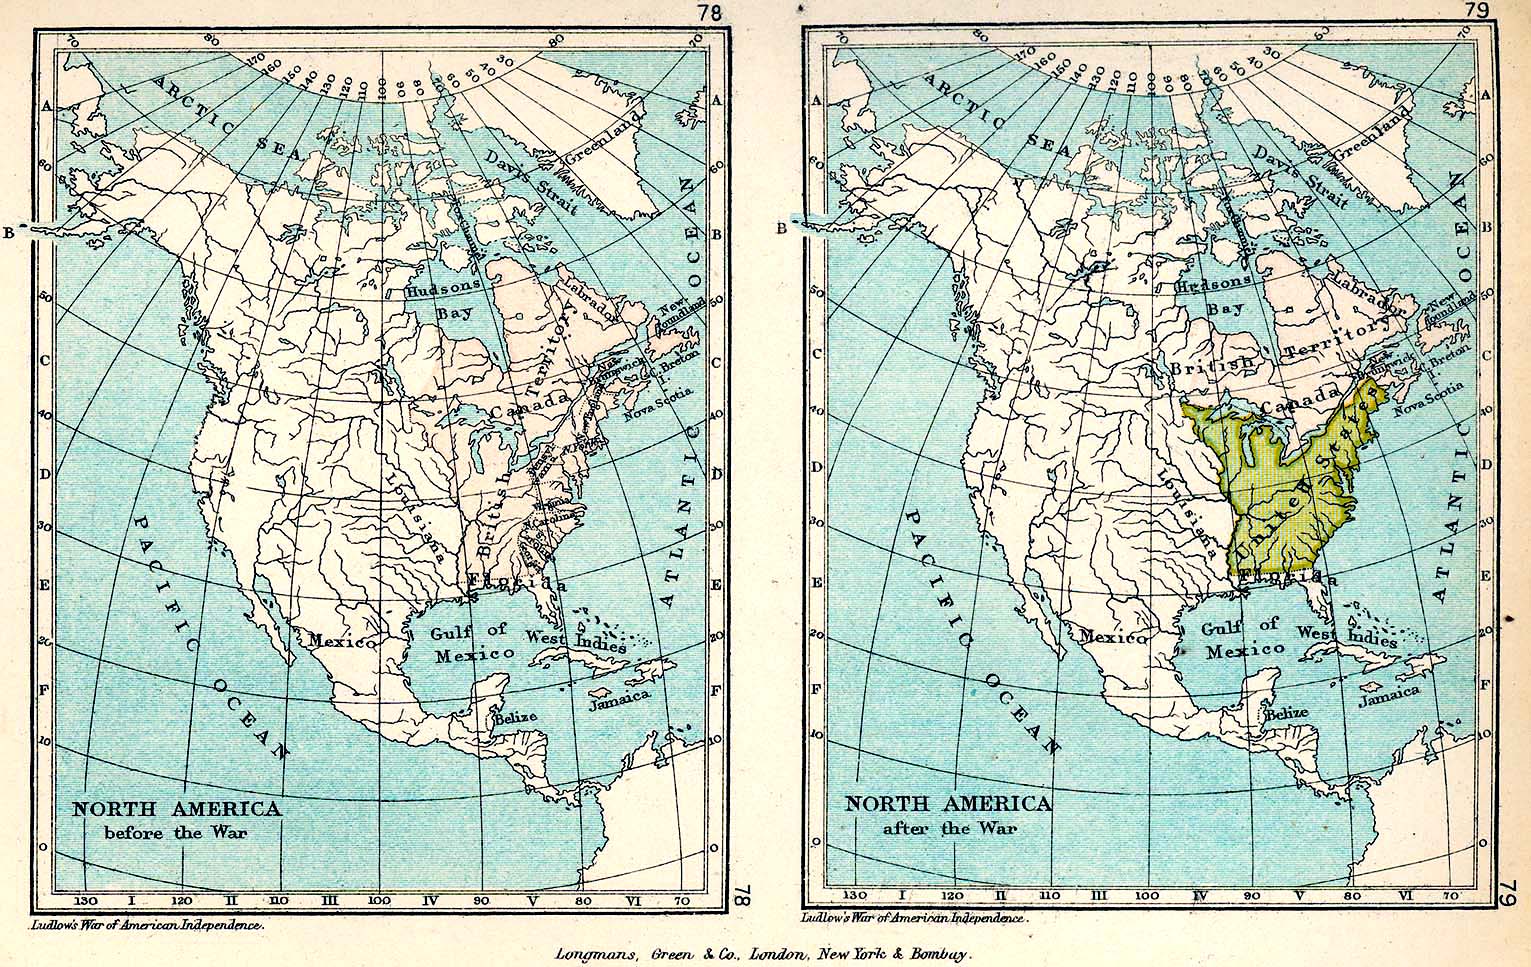 Maps of North America before and after the War of American Independence